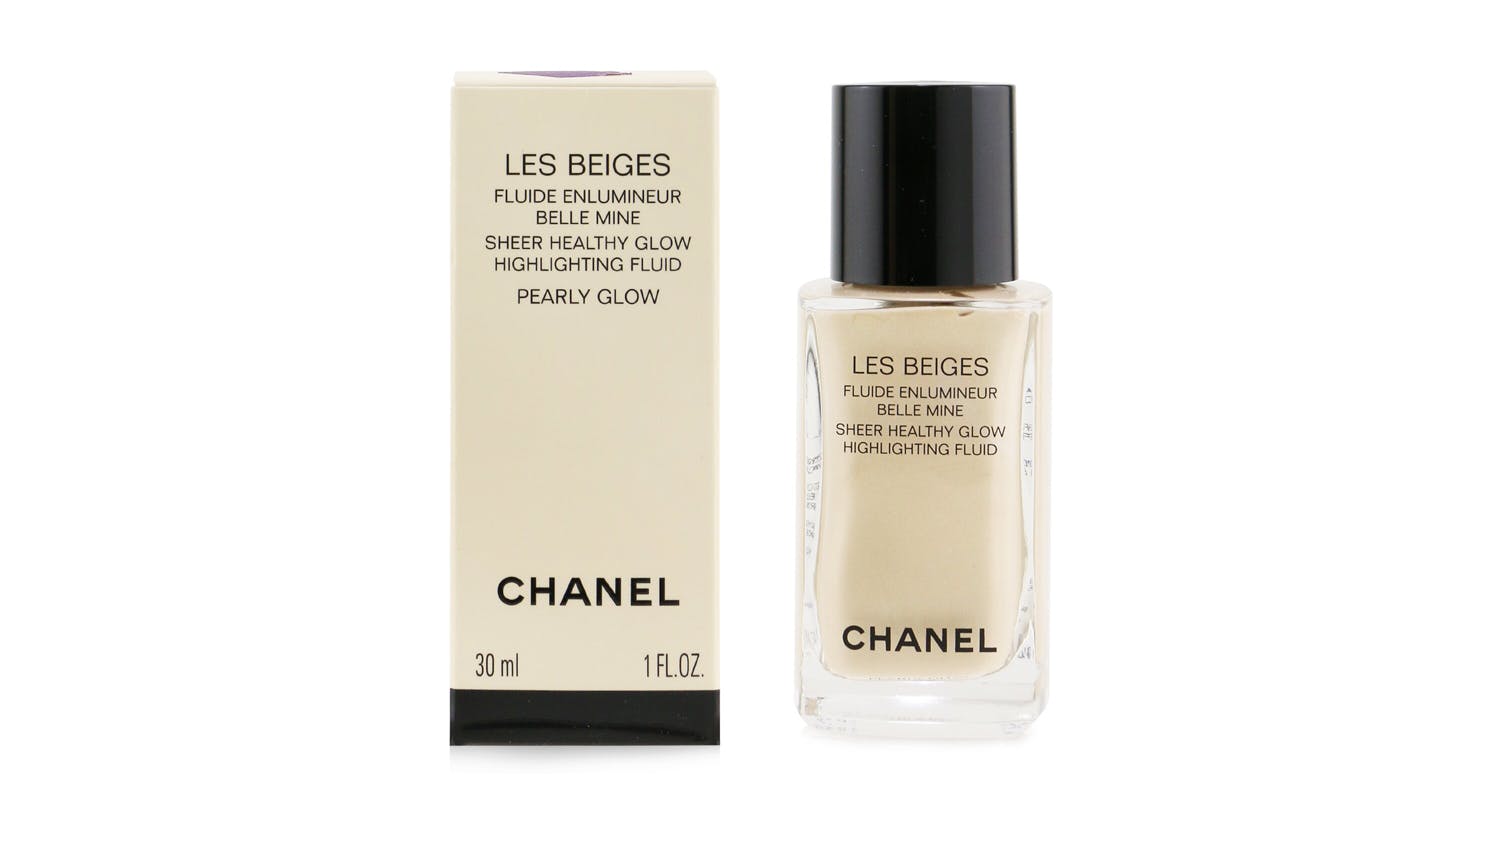 Chanel Les Beiges Sheer Healthy Glow Highlighting Fluid - Pearly Glow - 30ml/1oz